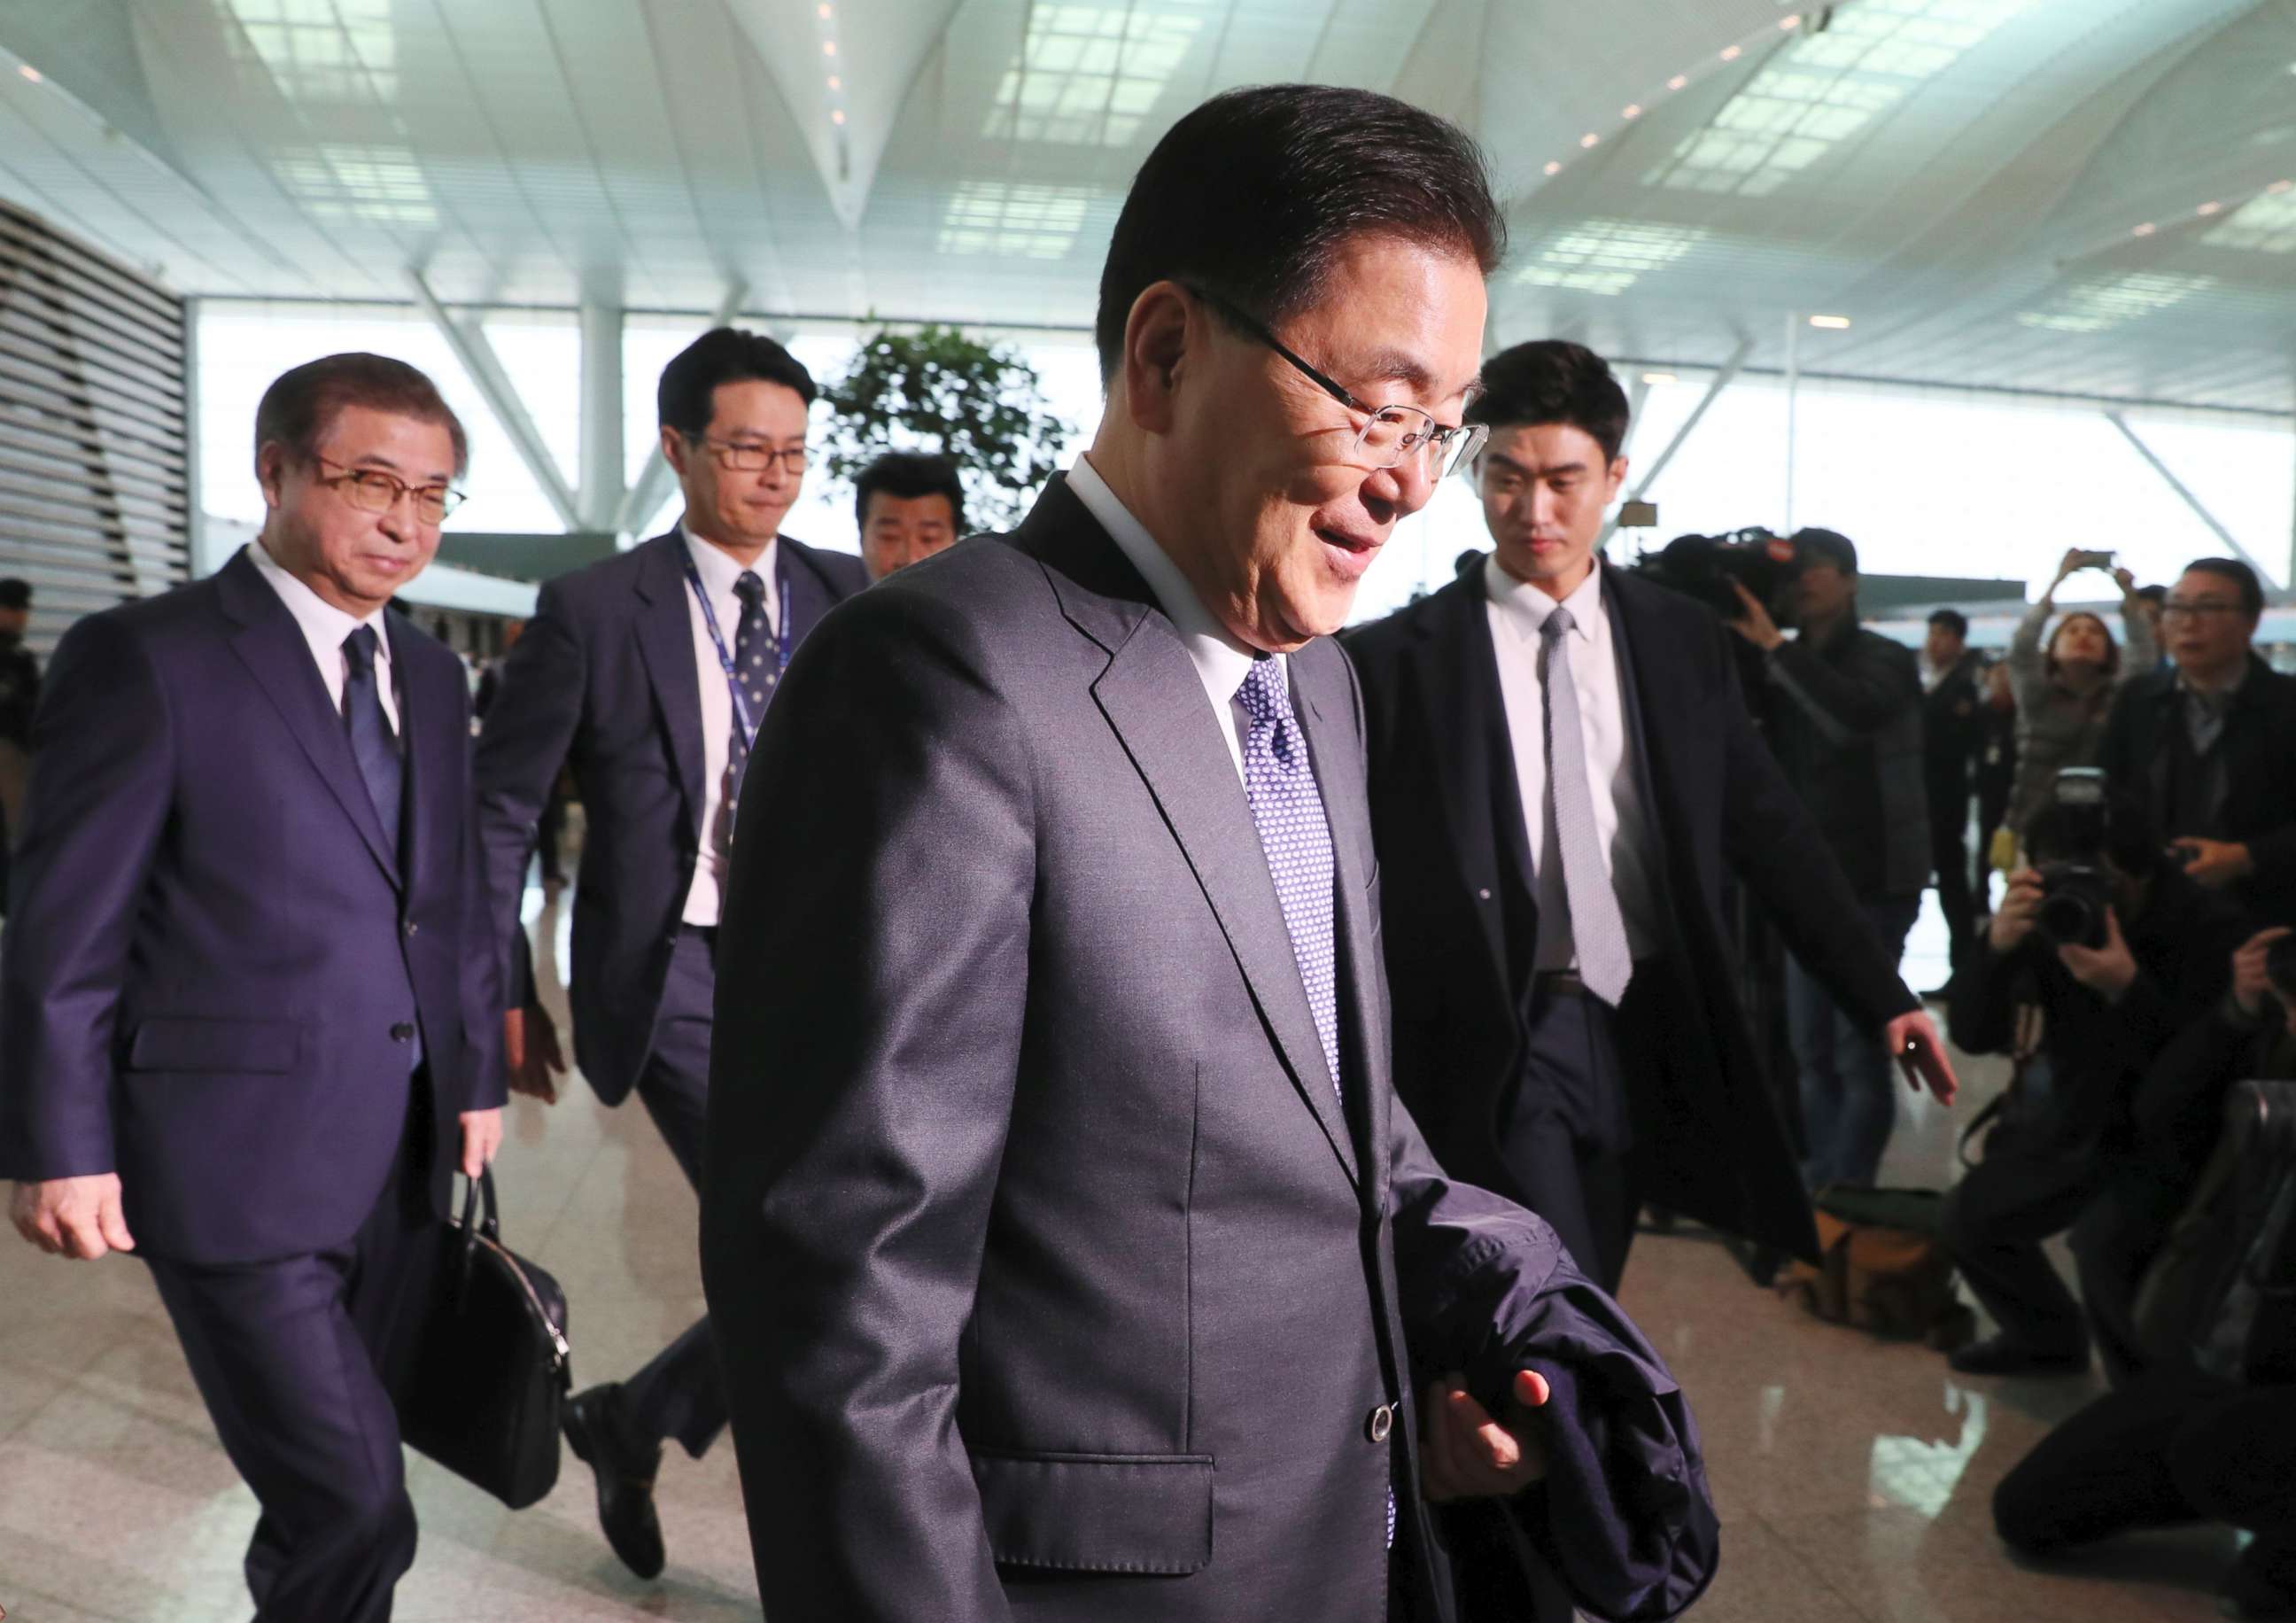 PHOTO: South Korea's national security advisor Chung Eui-yong and spy chief Suh Hoon arrive at Incheon airport, west of Seoul, on March 8, 2018 to leave for Washington.